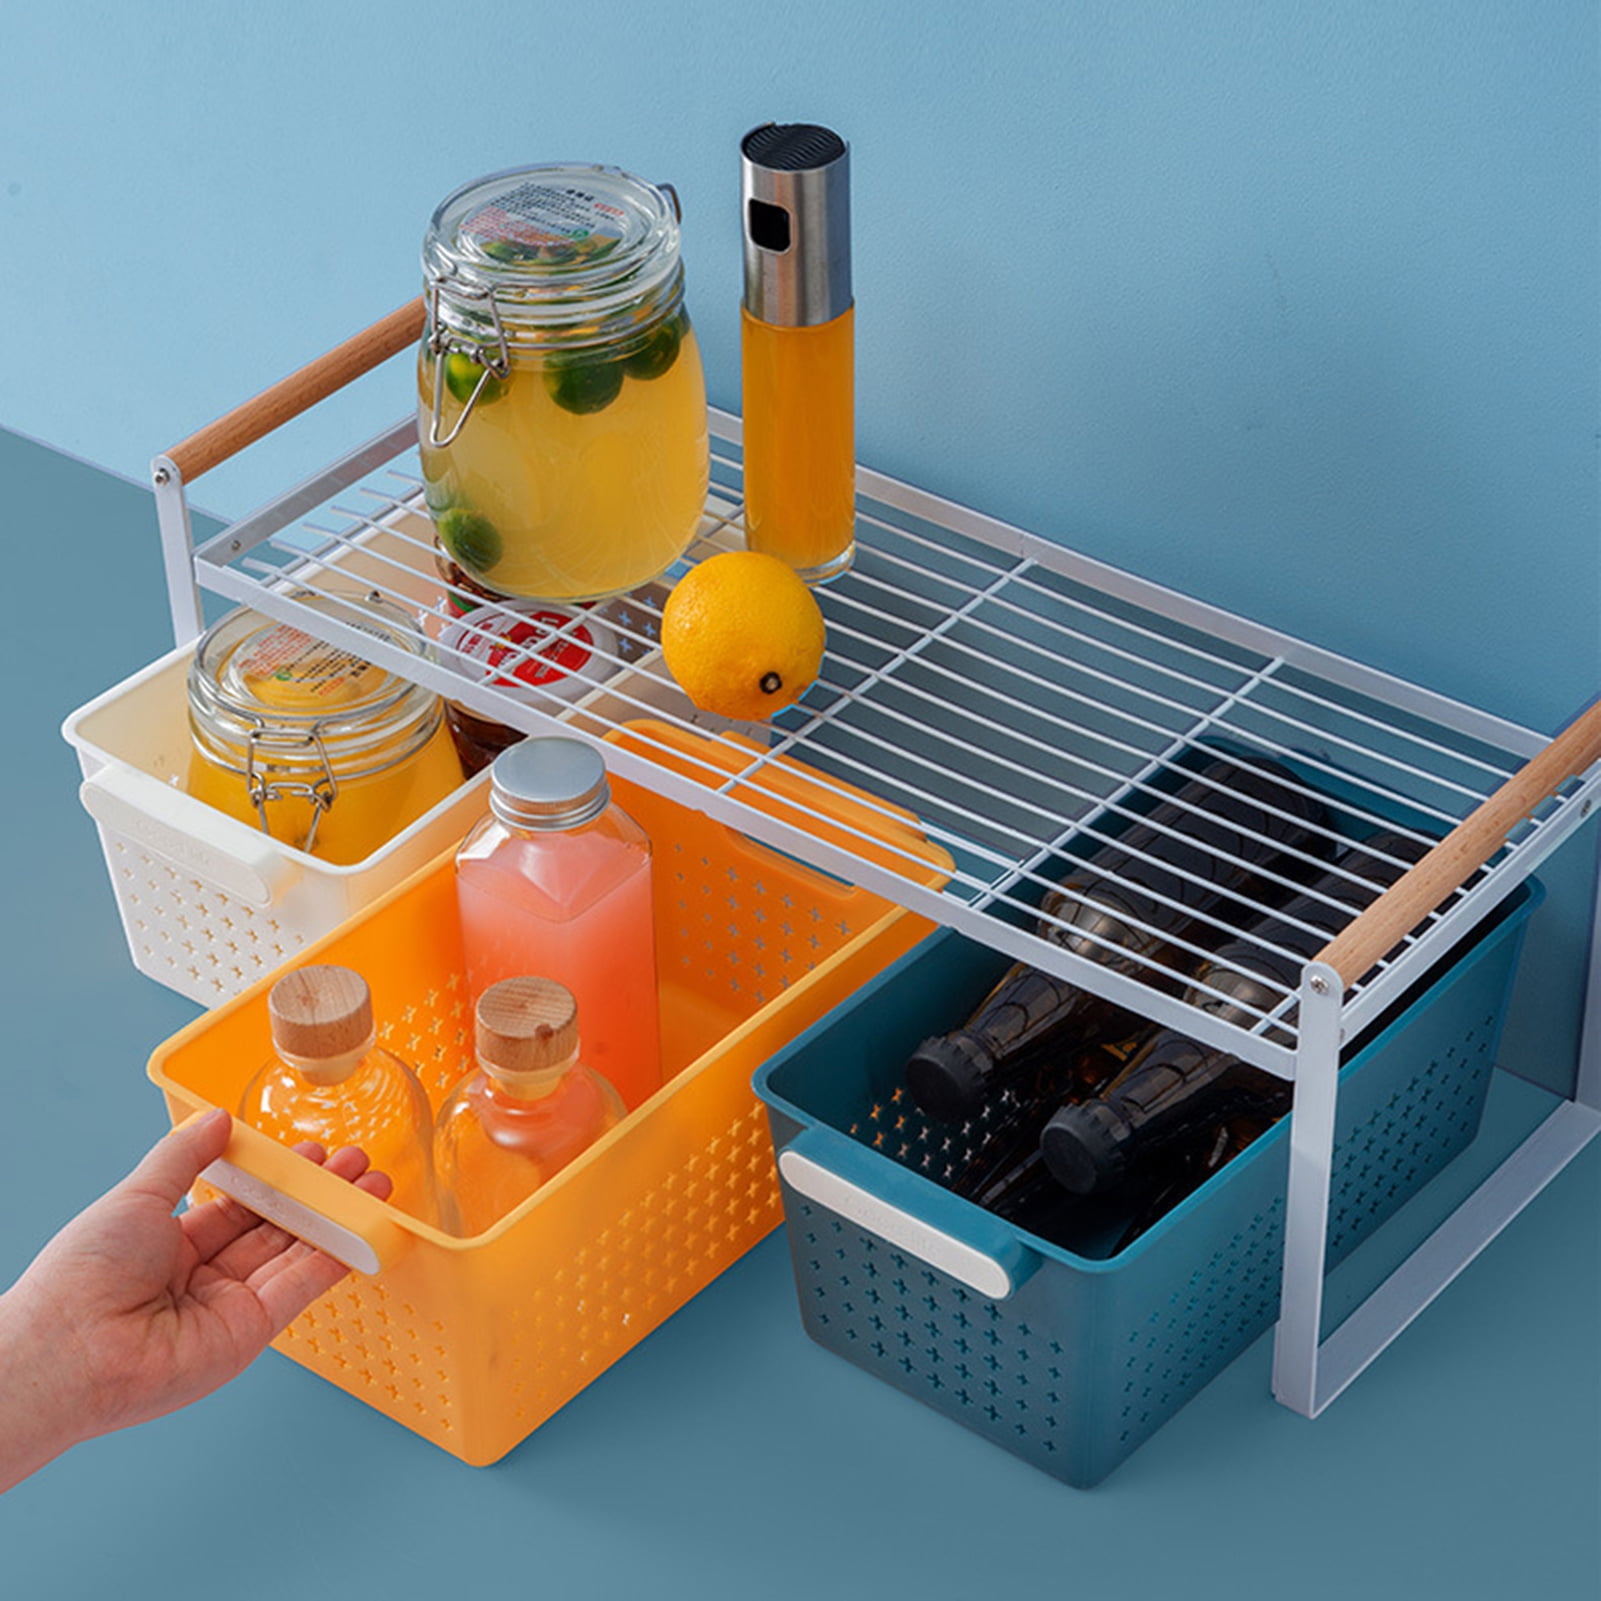 Manunclaims Plastic Storage Basket, Desktop Weave Baskets with Handle,  Portable Bathroom Open Storage Bin, Small Plastic Containers Shelf Brackets  for Shelves Countertop Kitchen Cabinet Office 